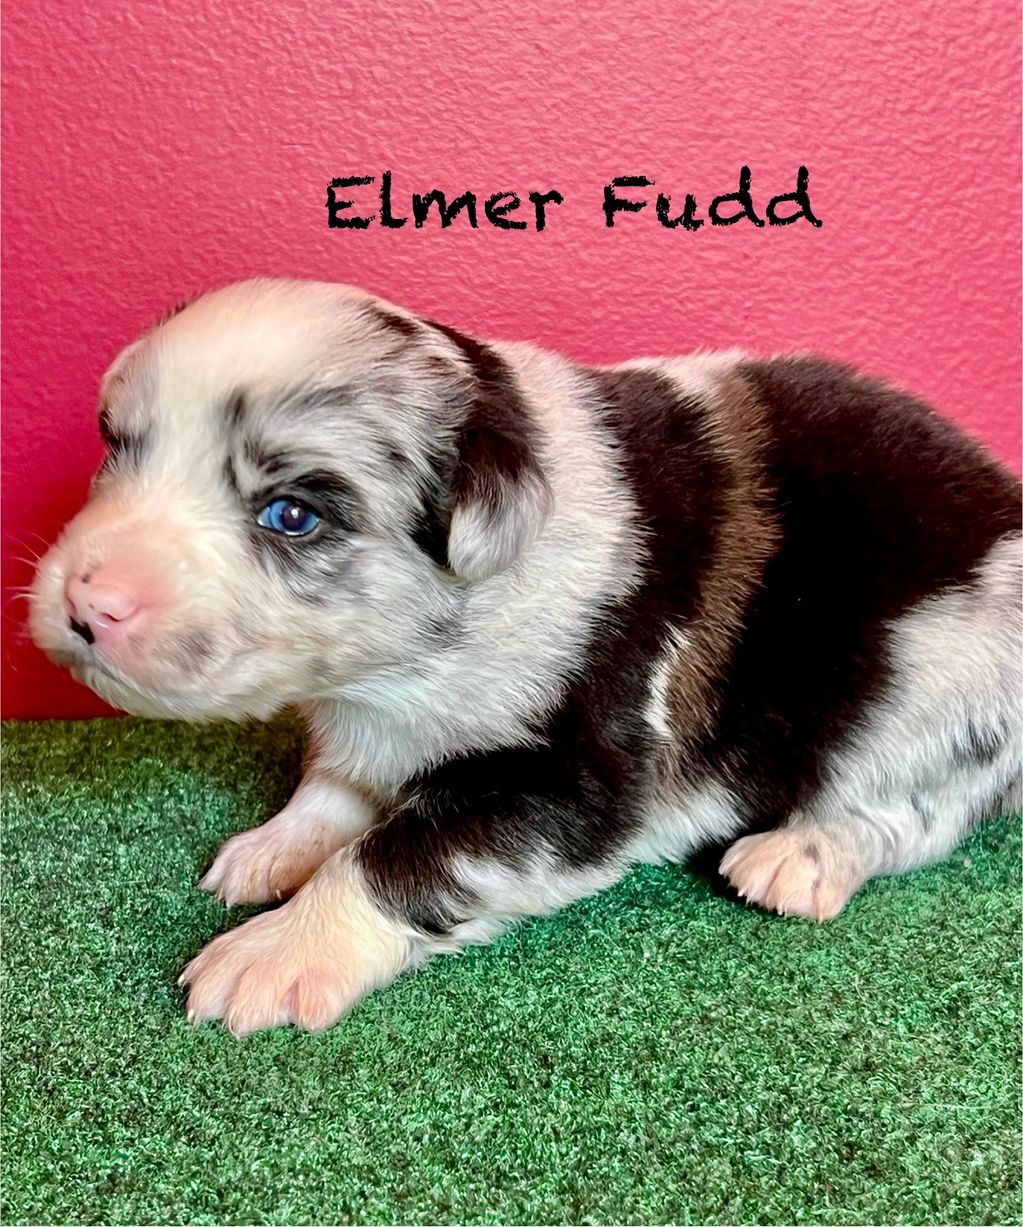 Elmer Fudd Blue Merle Bi Male. 2 blue eyes, available for a new family at 8 weeks old.